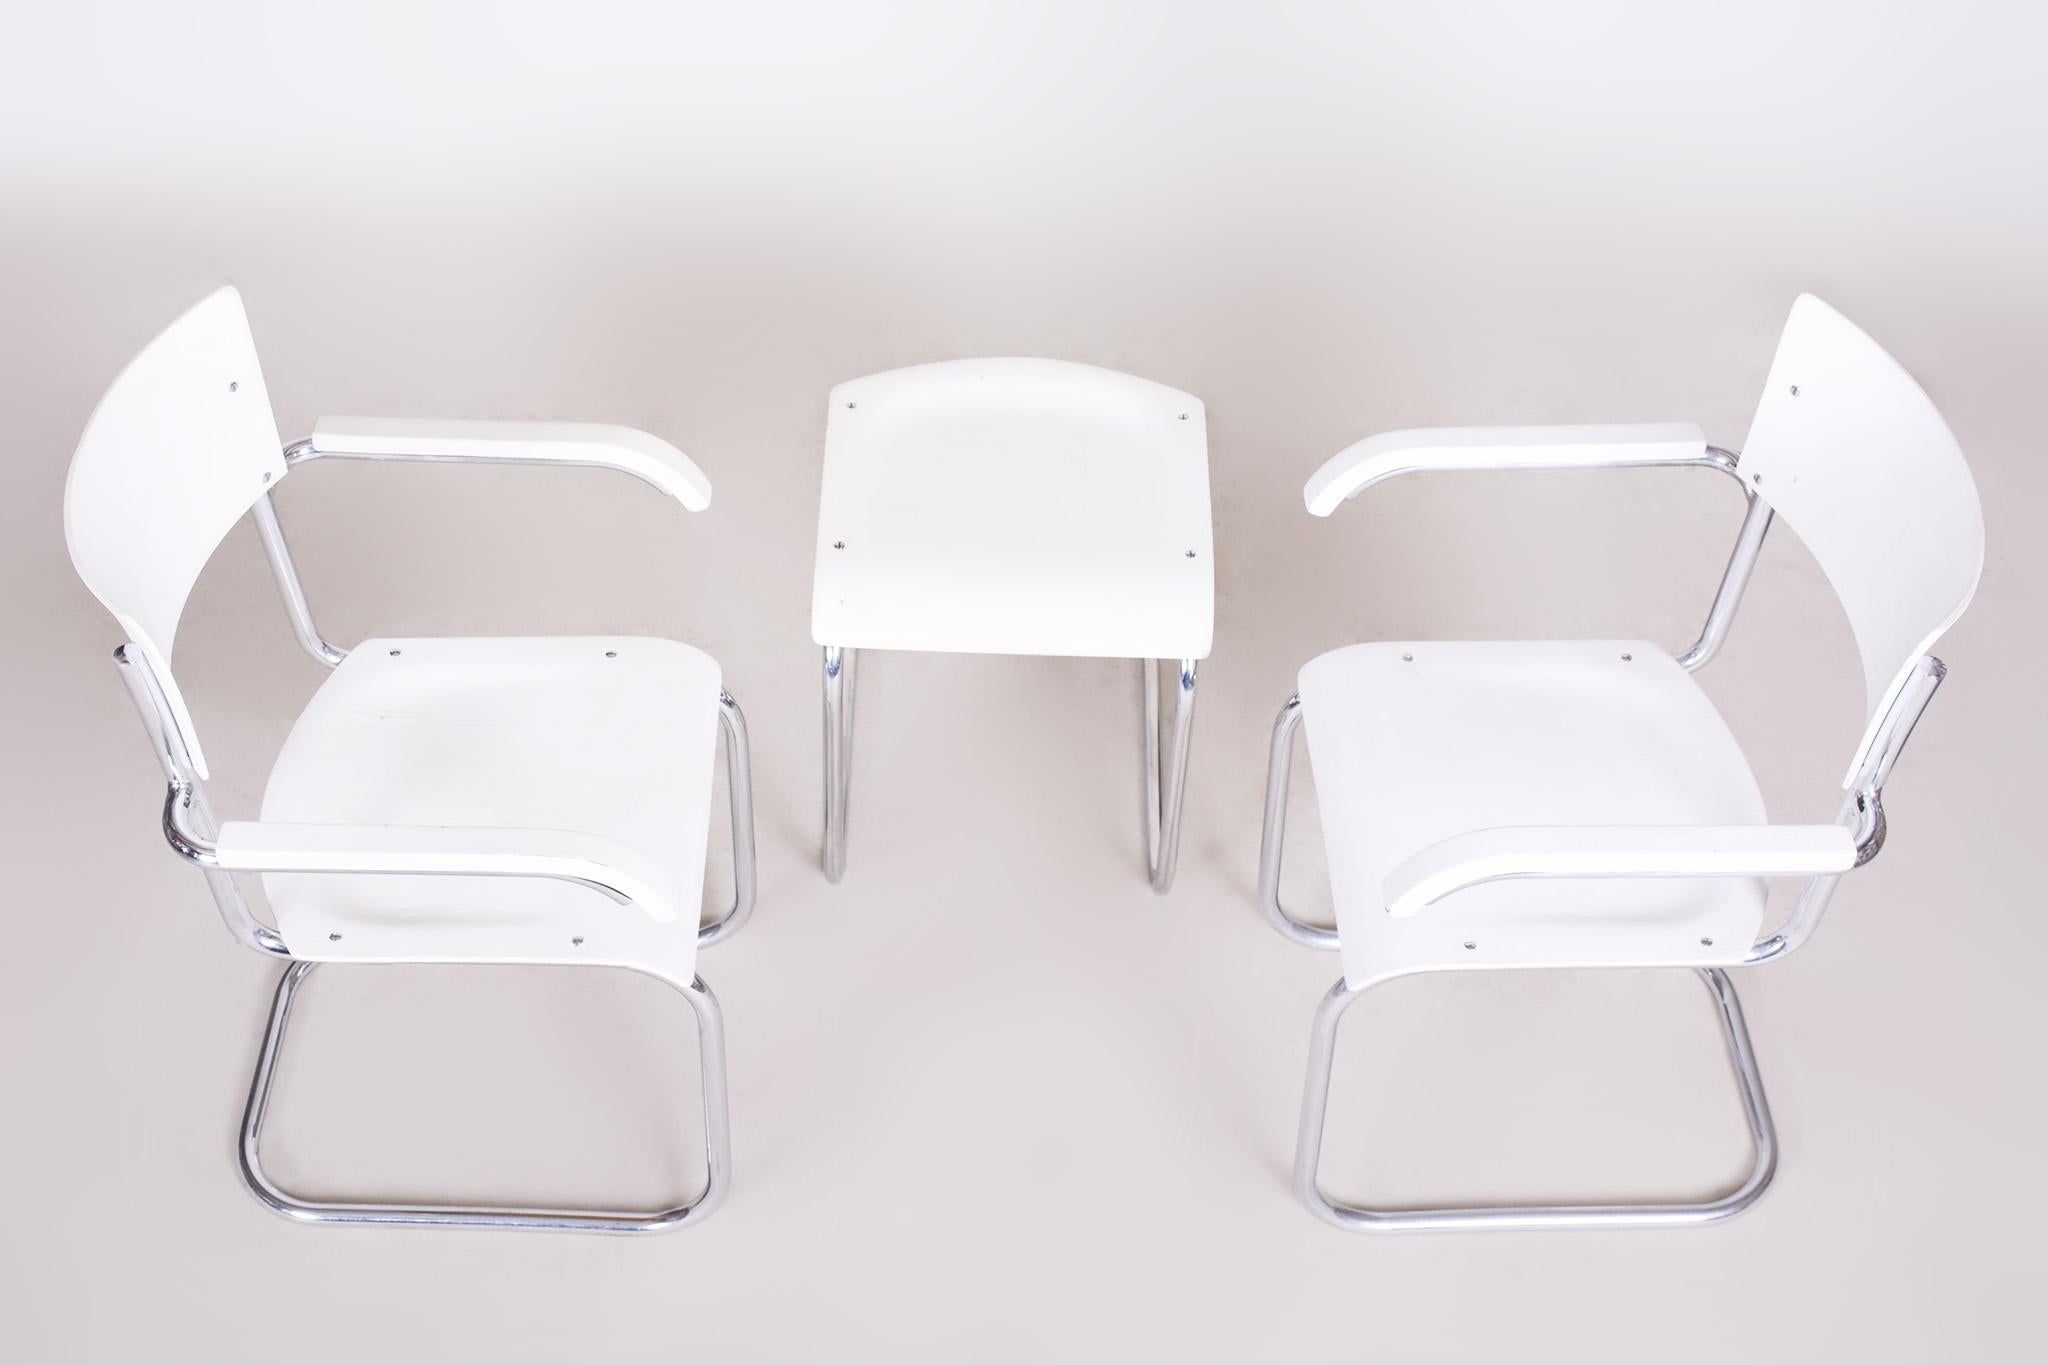 Pair of Original White Mucke Melder Chairs and Stool Made in 1930s Czechia For Sale 7